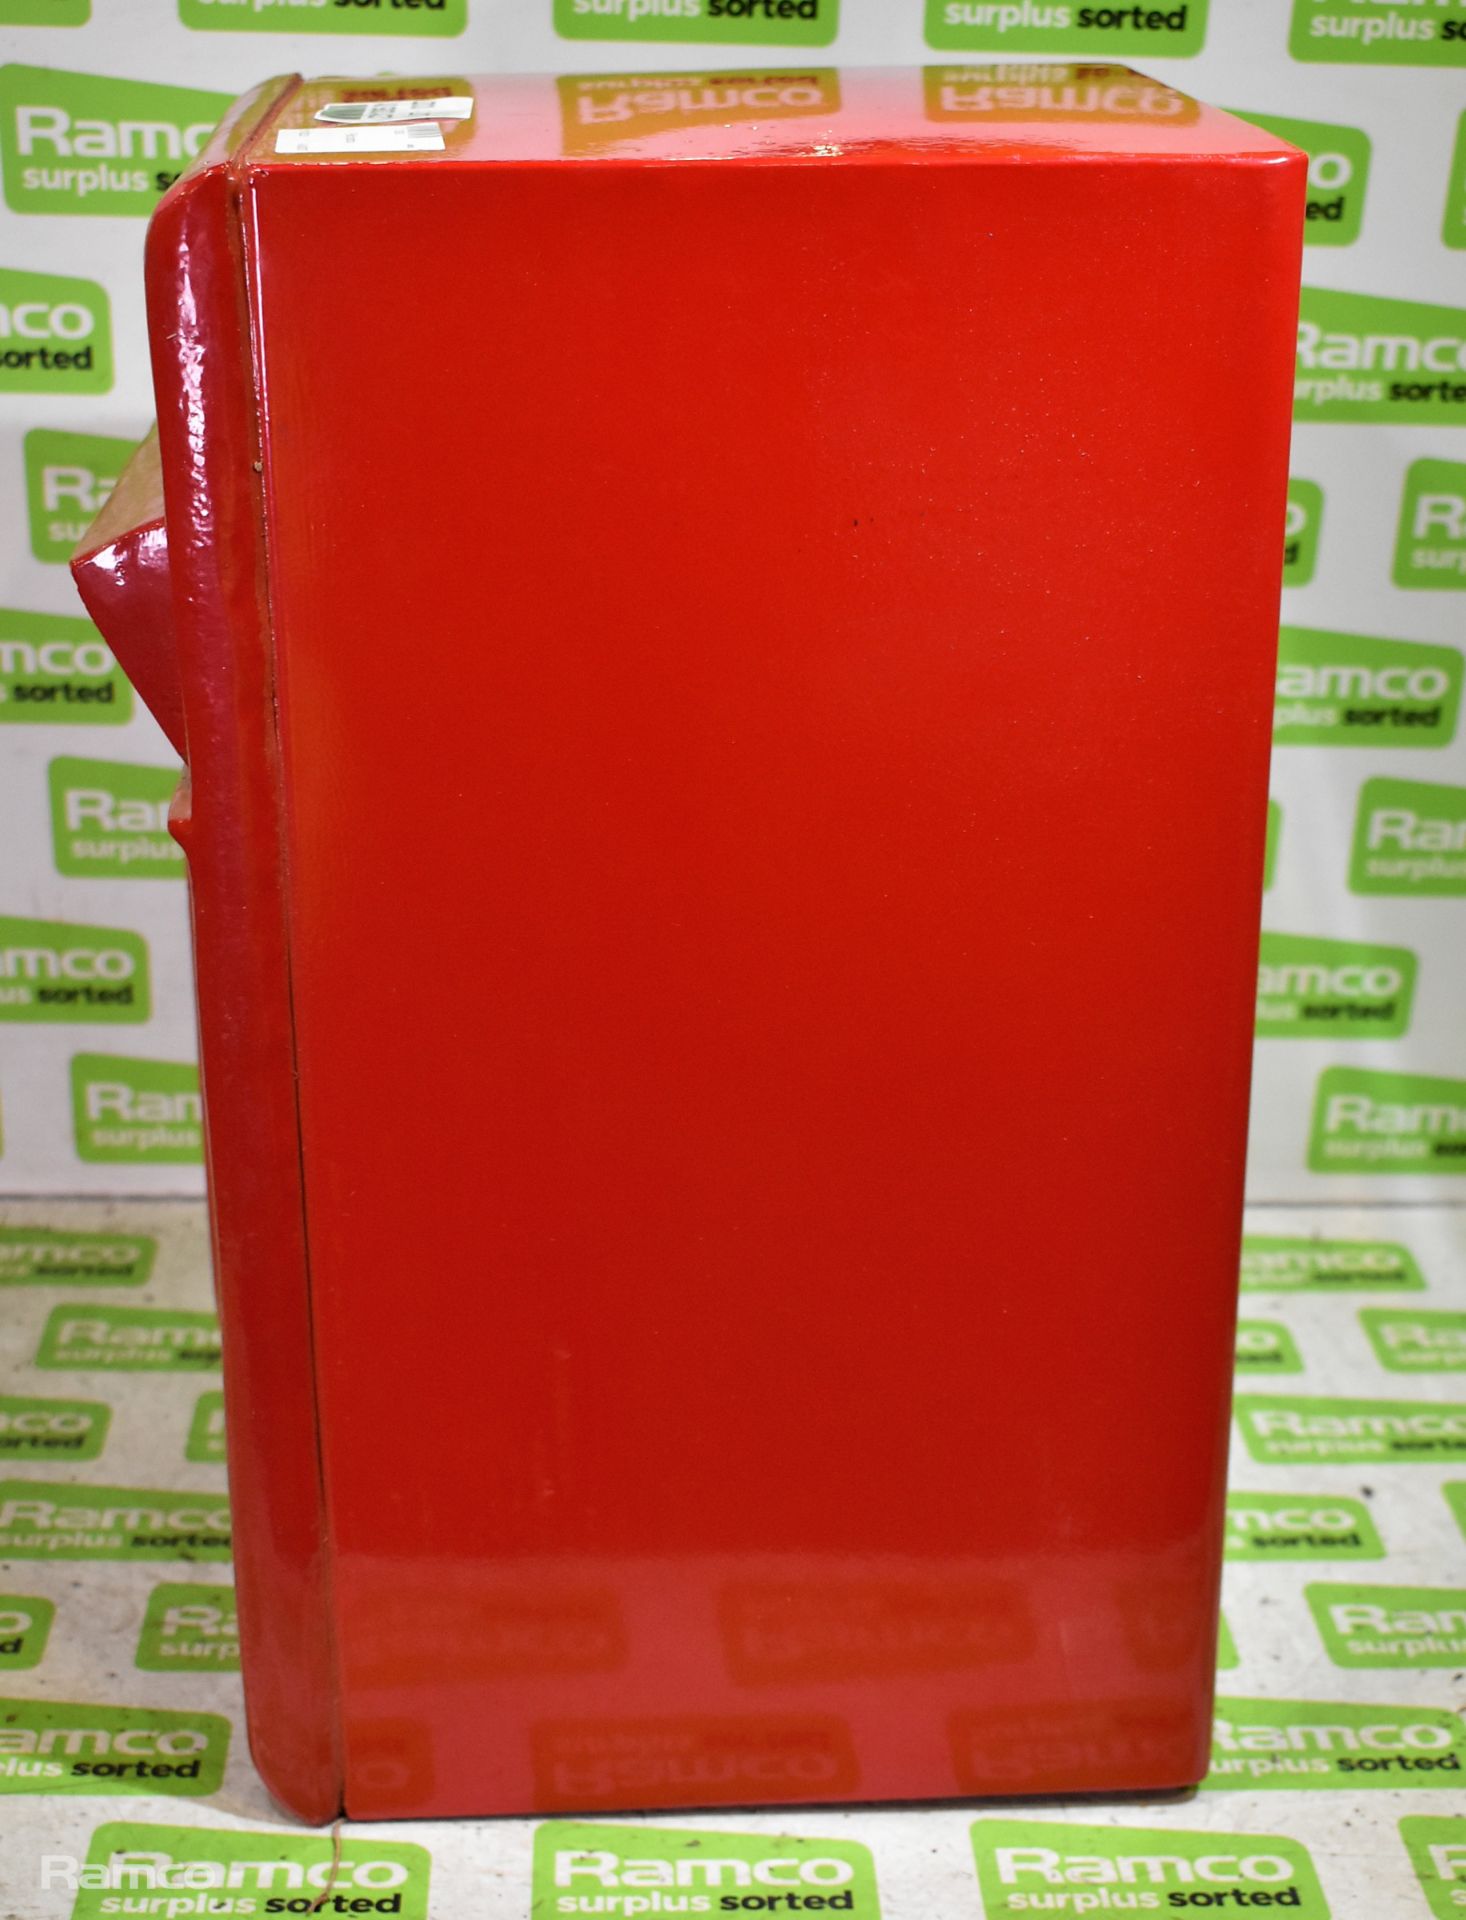 Red replica postbox - Image 4 of 5